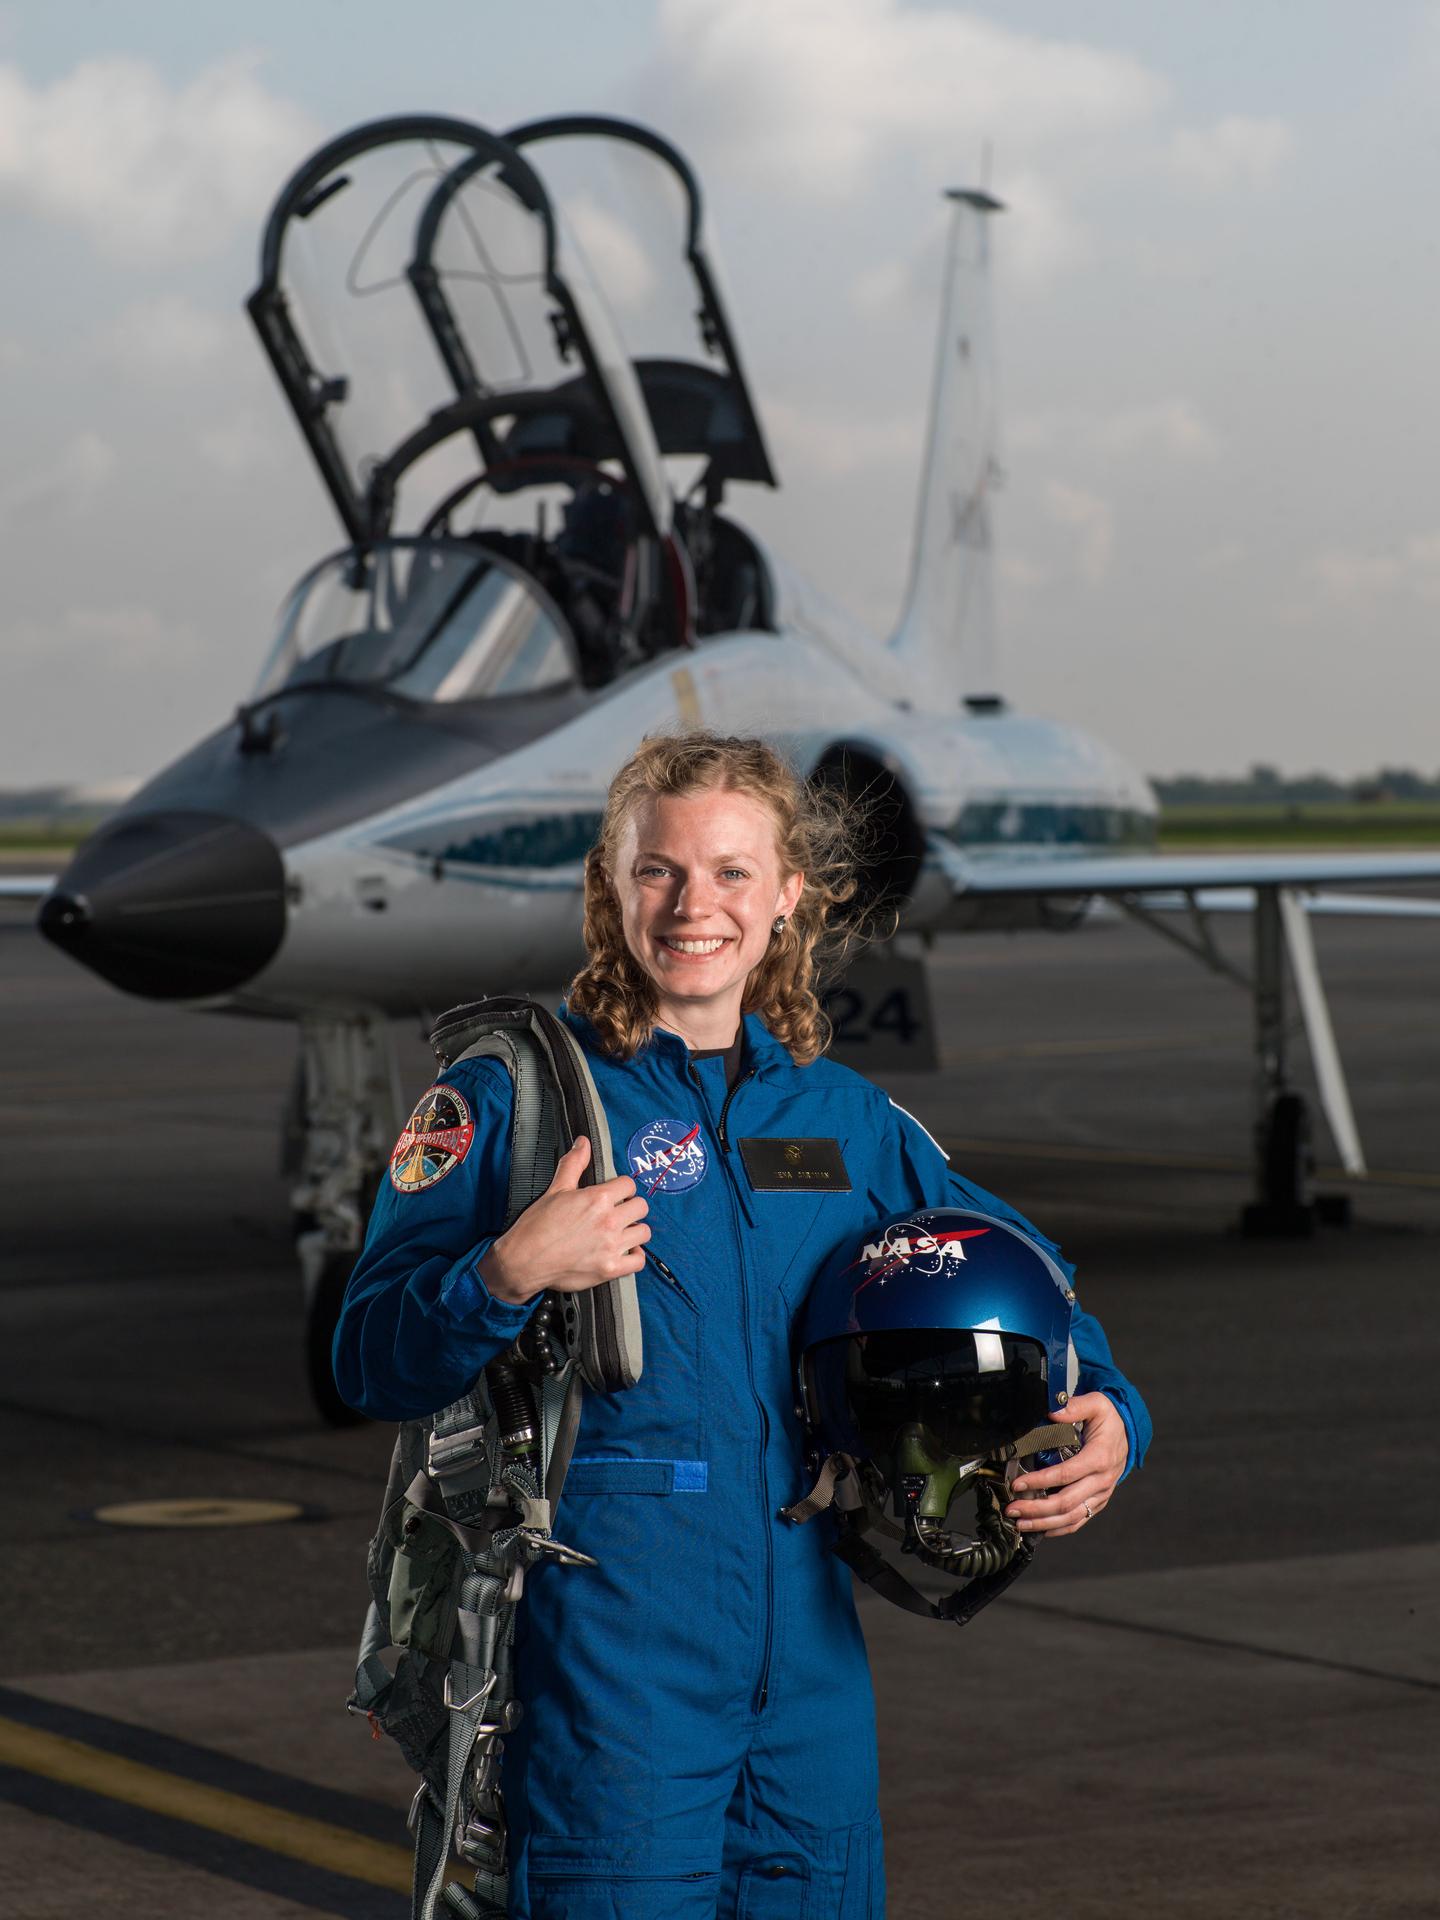 NASA portrait of 2017 Astronaut Candidate Zena Cardman in front of a T-38 trainer aircraft at Ellington Field